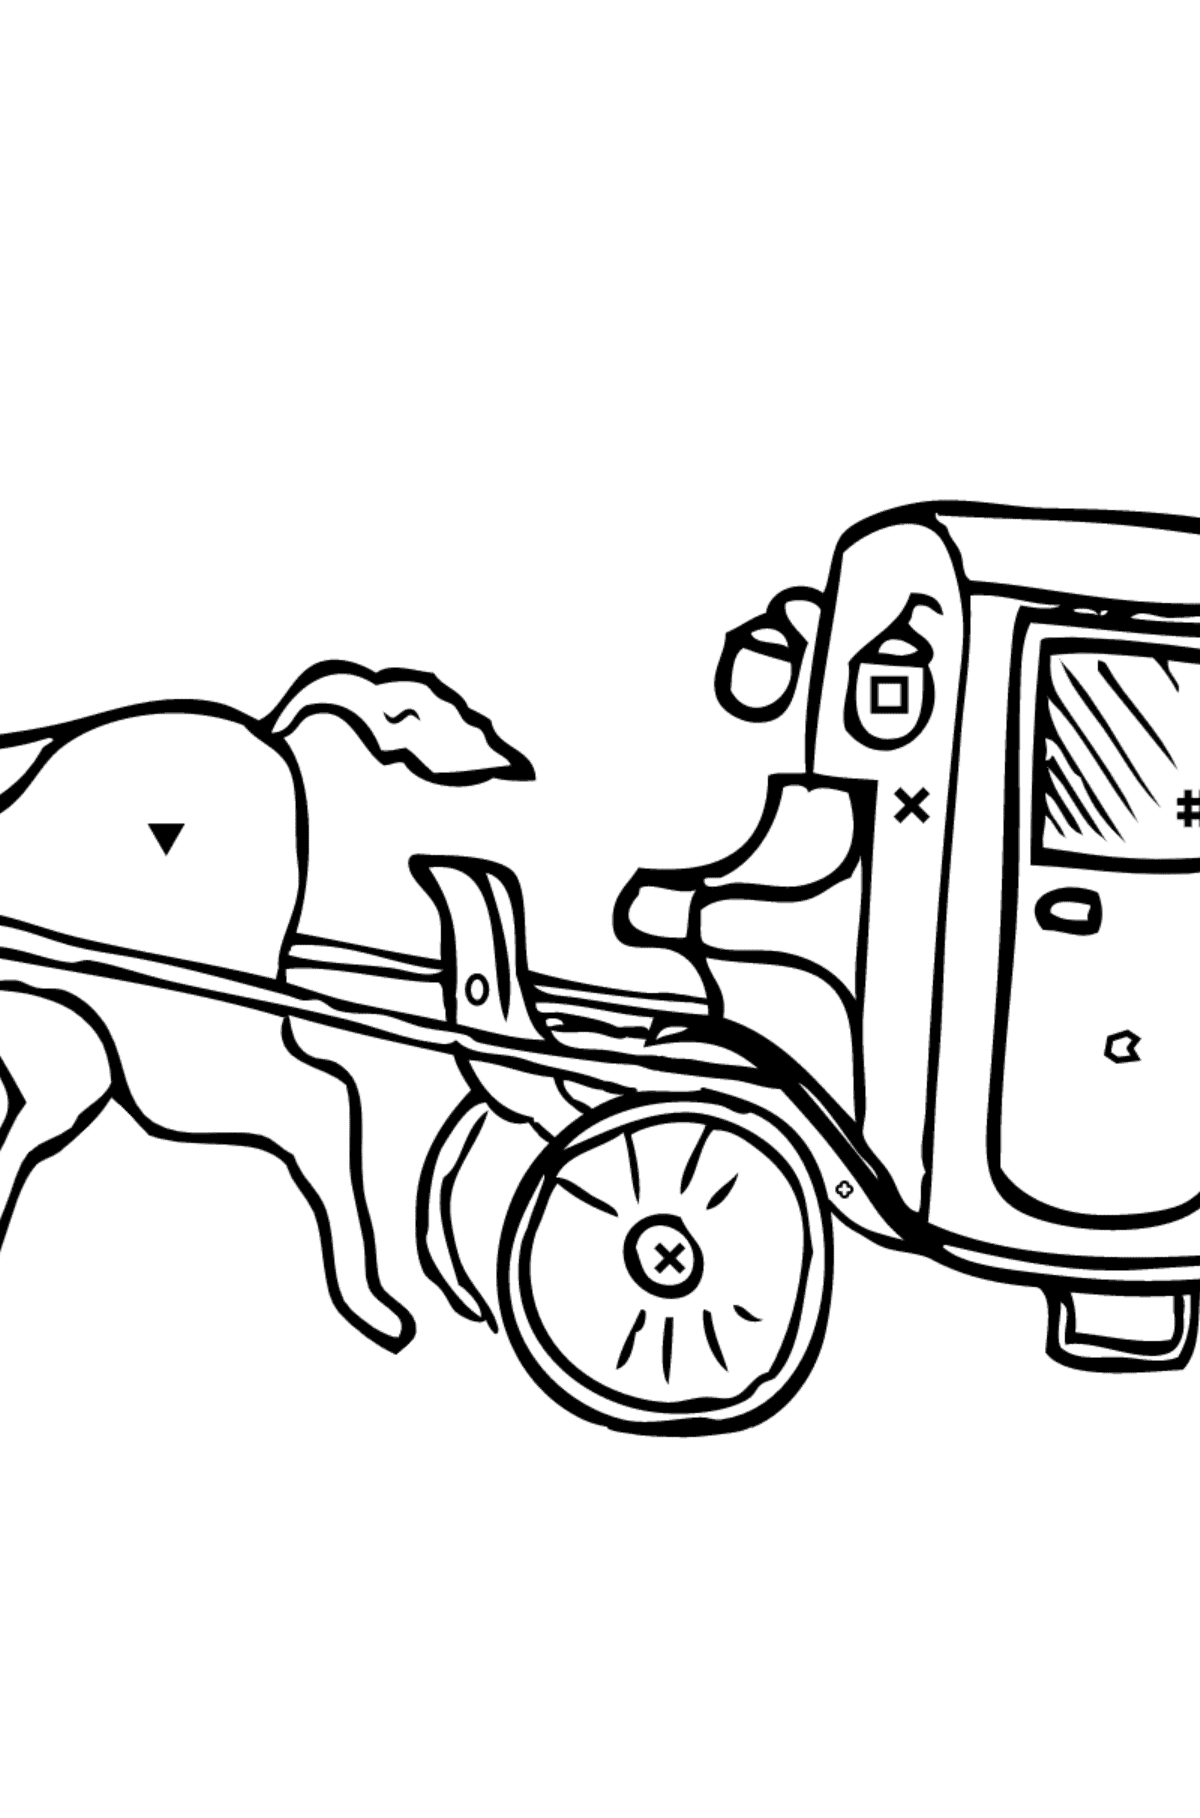 Coloring Page - A Cab - Coloring by Symbols and Geometric Shapes for Children